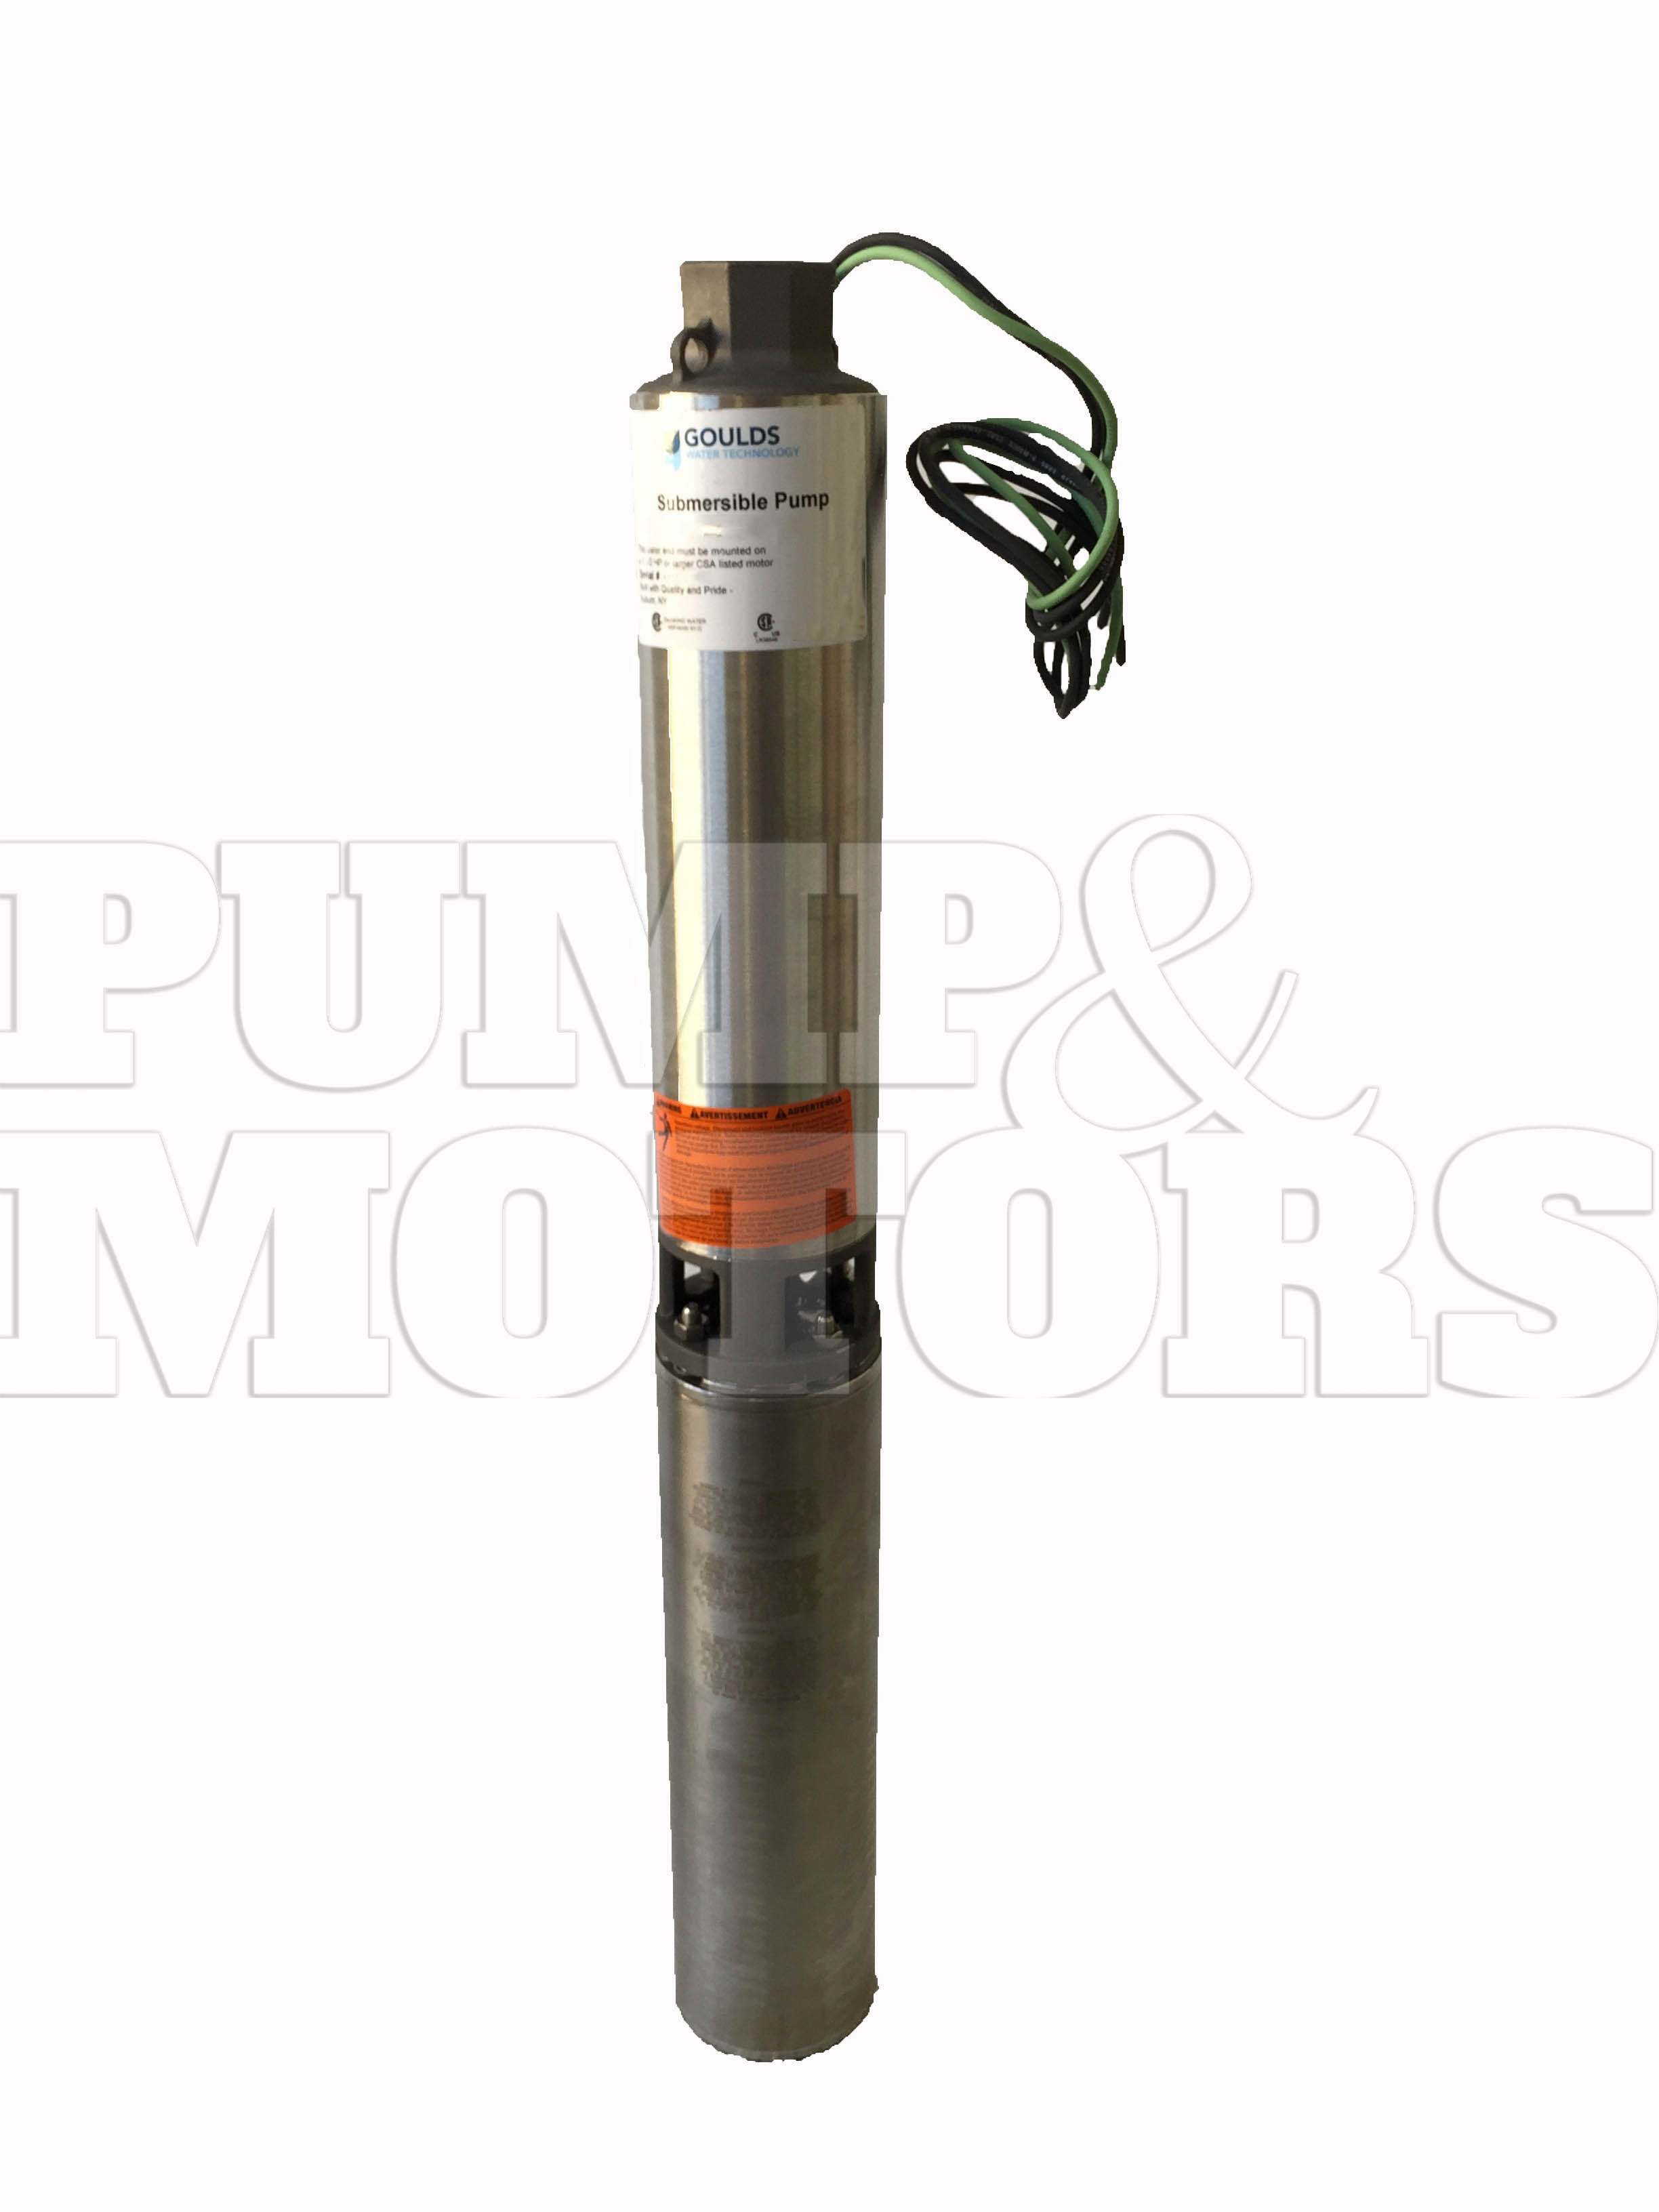 Goulds 7GS07422C 3/4HP 230V 4" Submersible Water Well Pump 7GPM